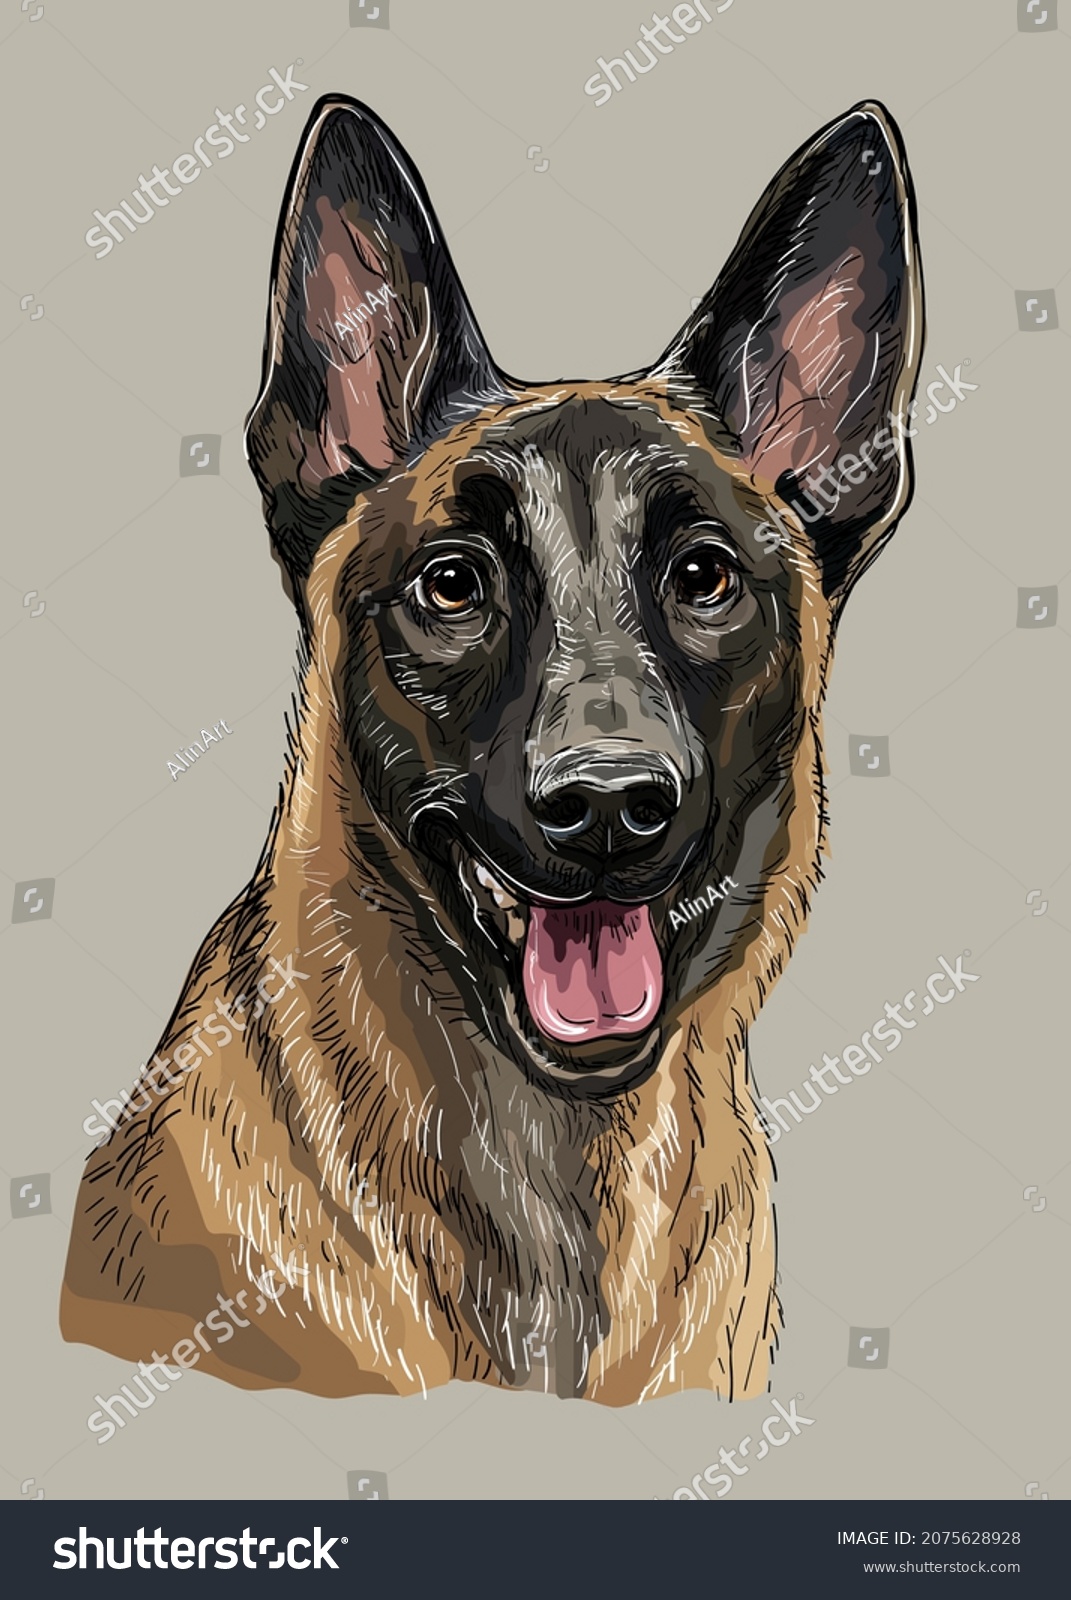 SVG of Realistic head of belgian shepherd malinois dog. Color vector hand drawing illustration isolated on gray background. For decoration, design, print, posters, postcards, stickers, t-shirt, embroidery svg